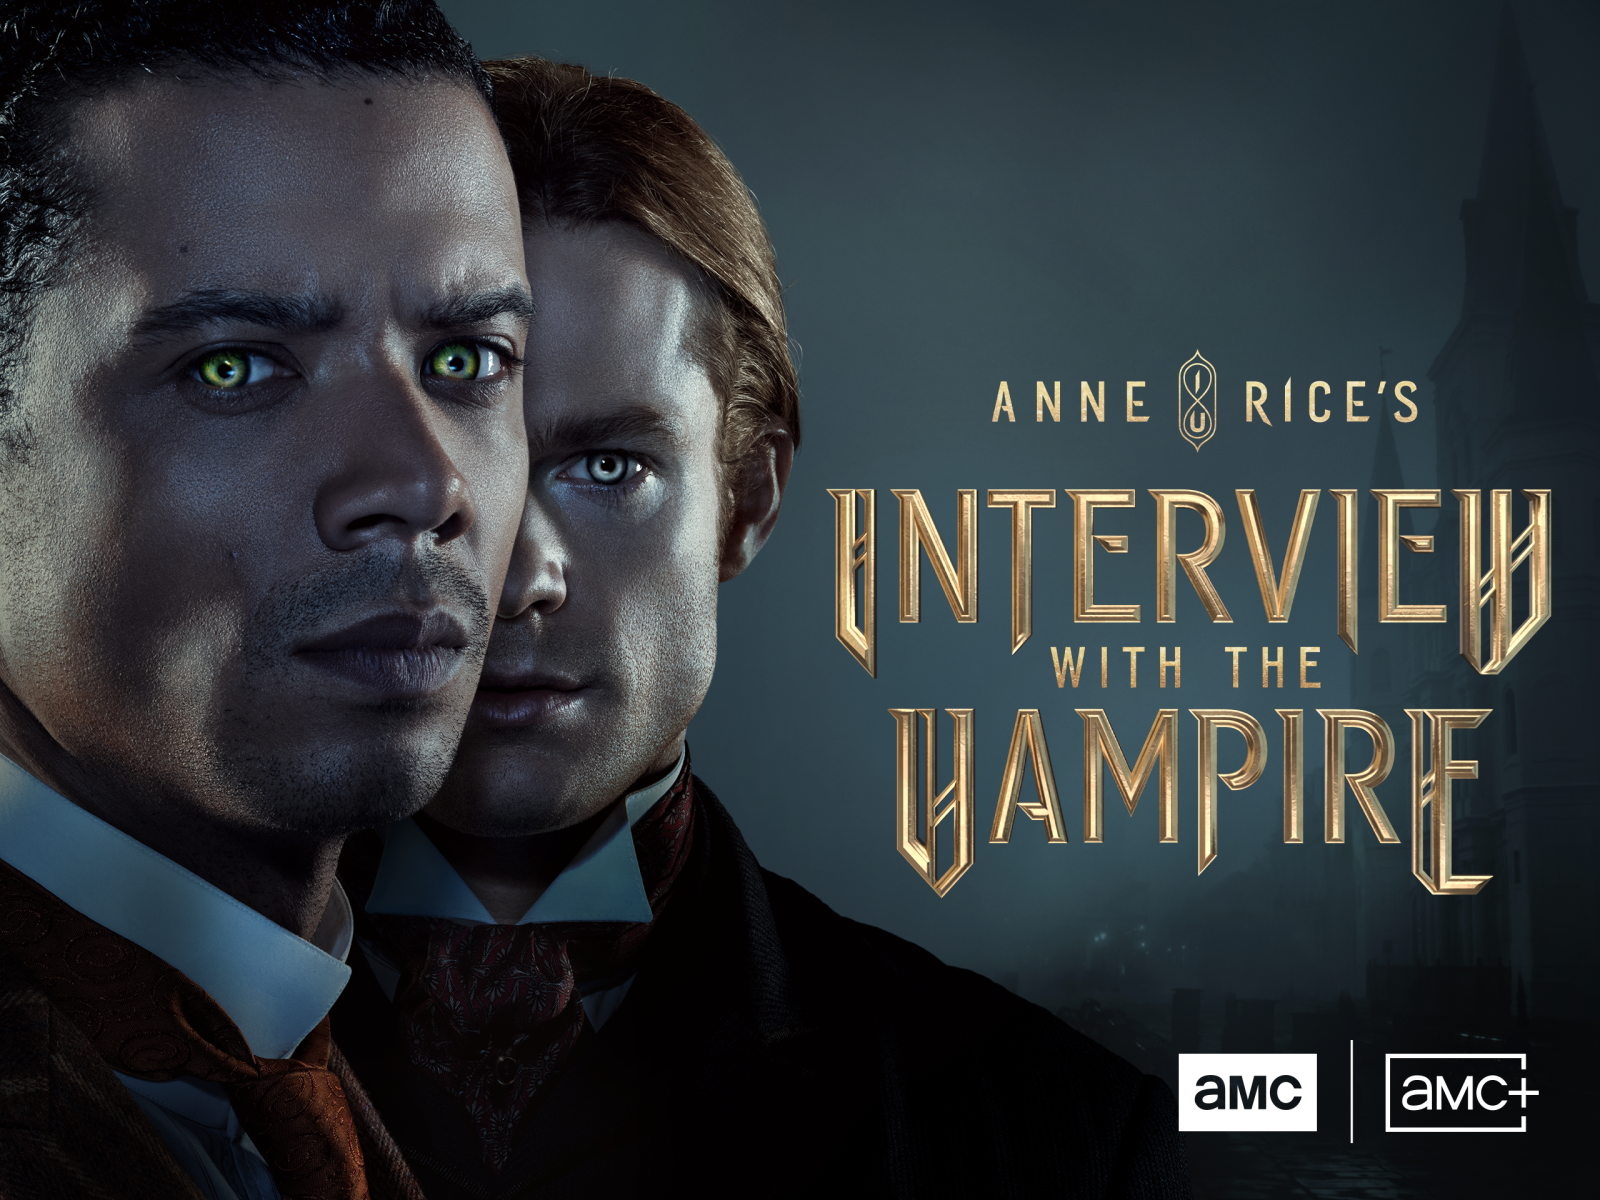 Interview with the vampire - Interview with the vampire